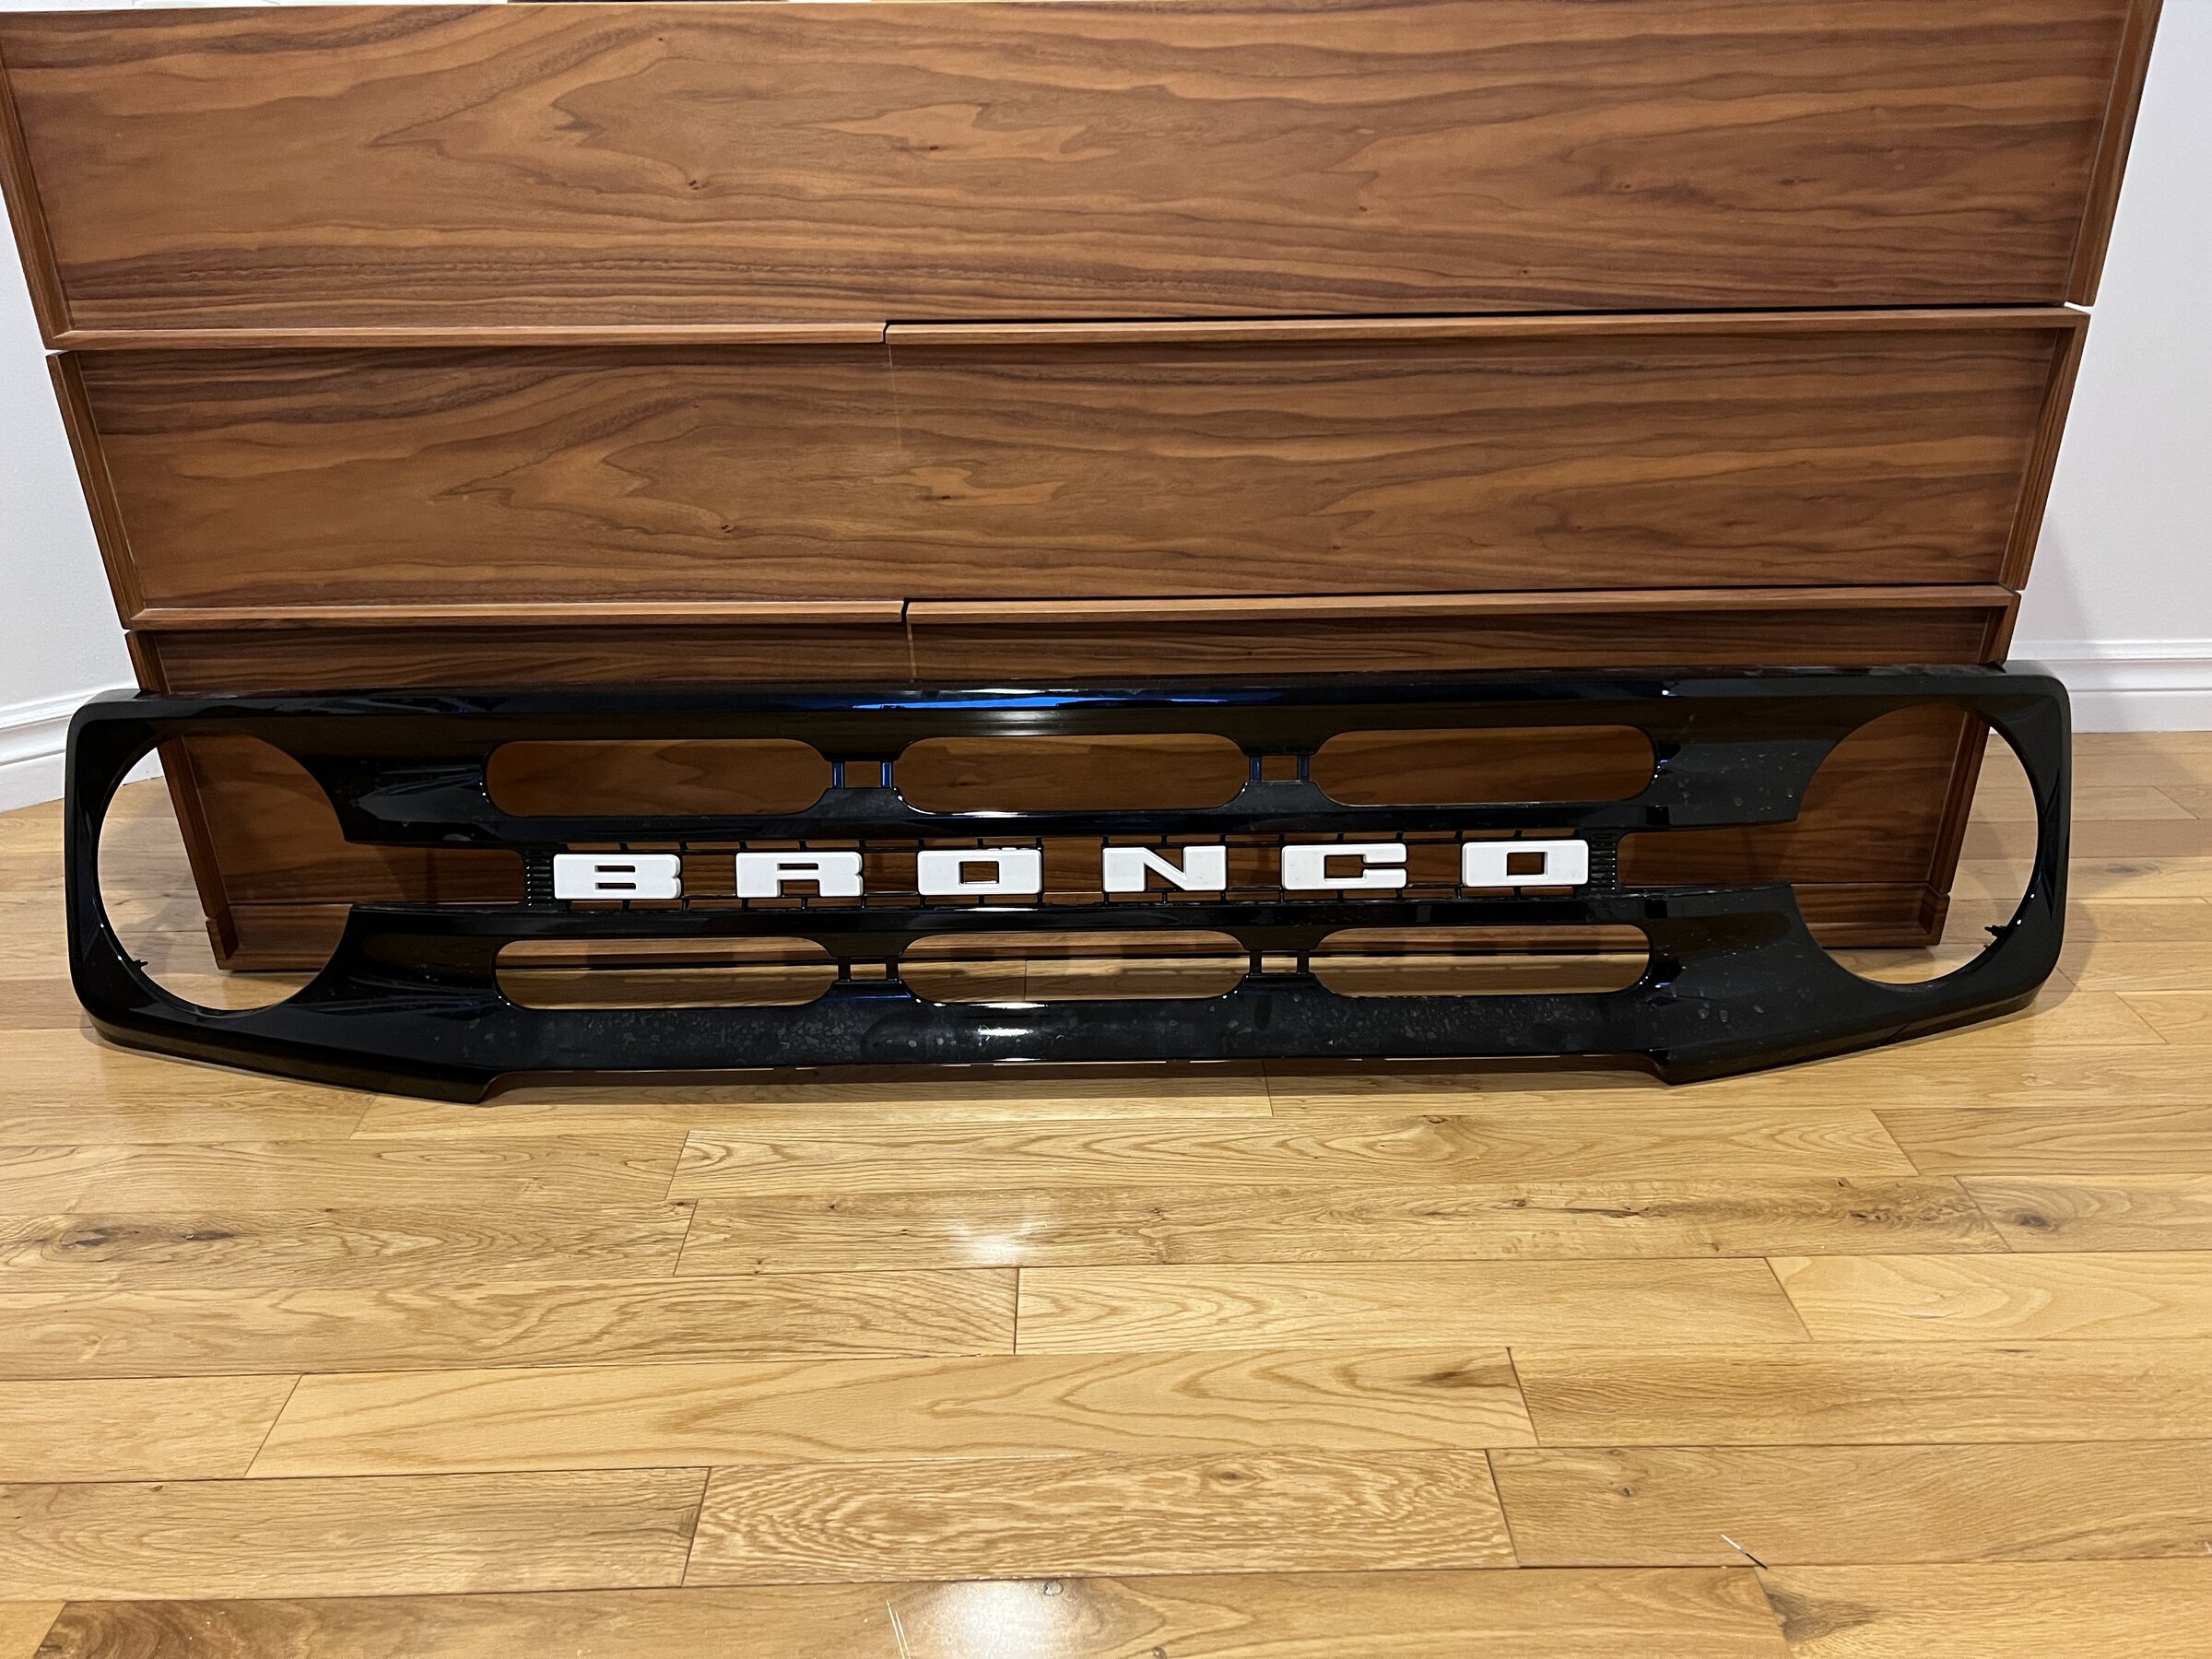 Ford Bronco Outer Banks grill for sale and potentially Velocity Blue hood as well 74F1DB63-A2A2-421A-87BB-BCBDB4F57F7D